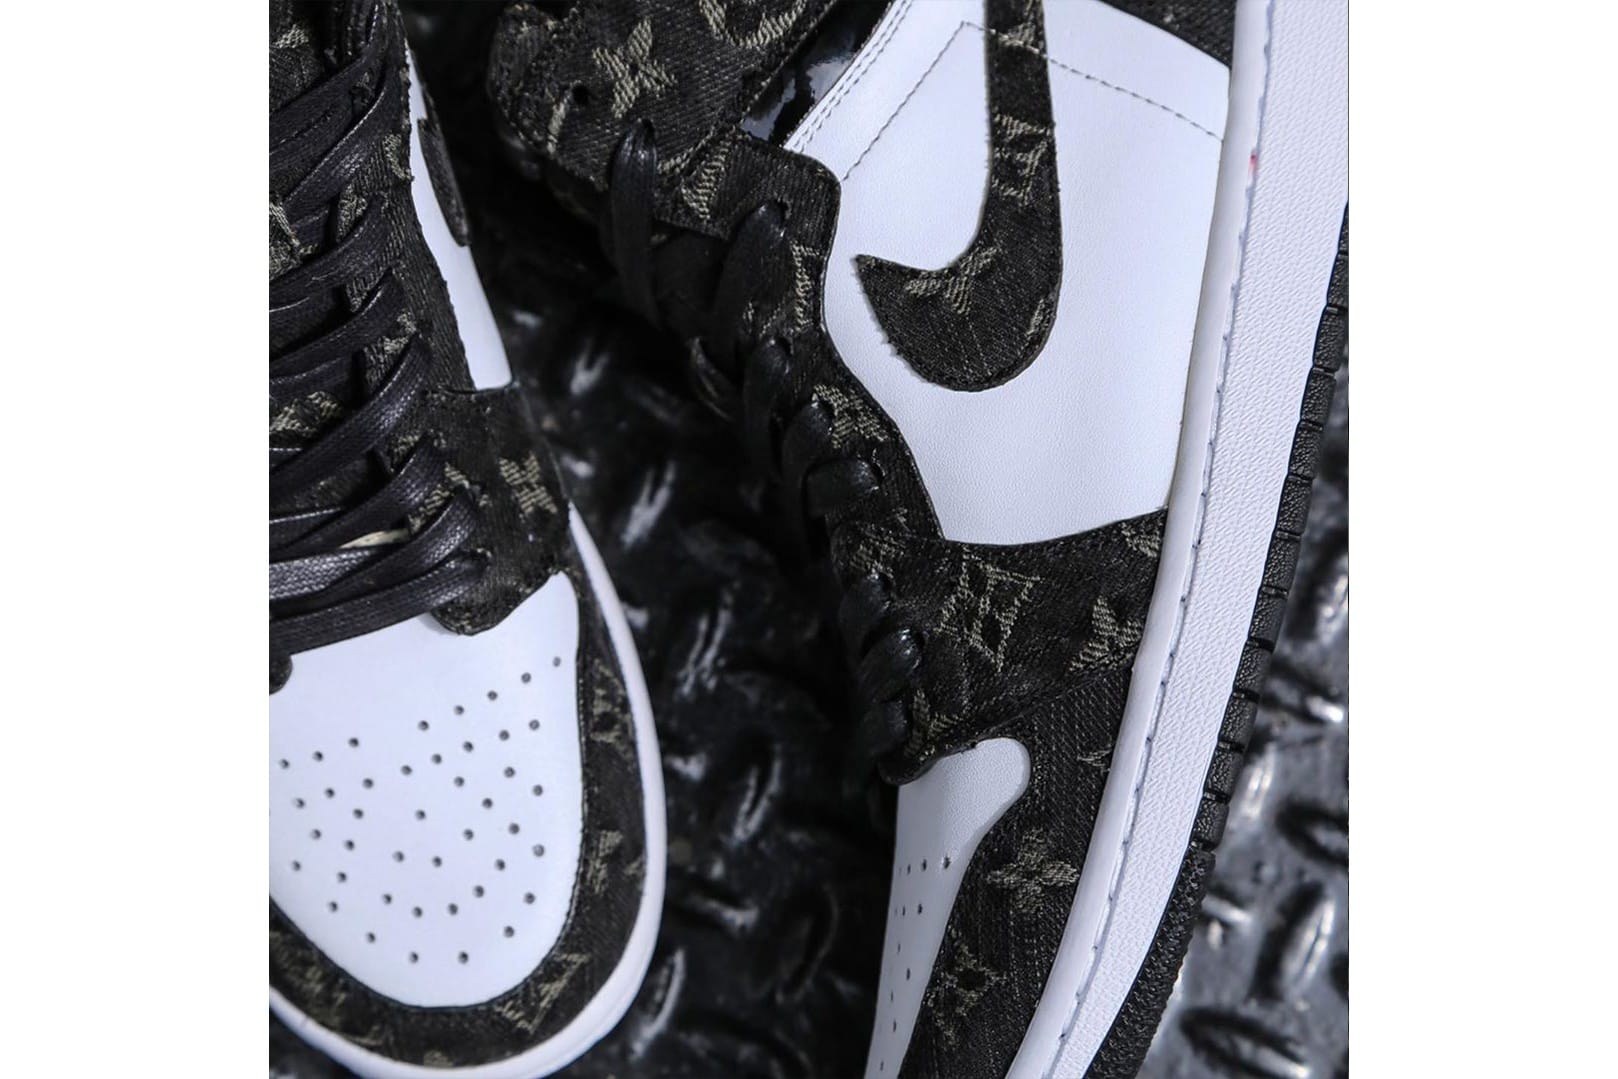 Virgil Ablohs Louis Vuitton appointment inspired this Nike Air Jordan 1   South China Morning Post